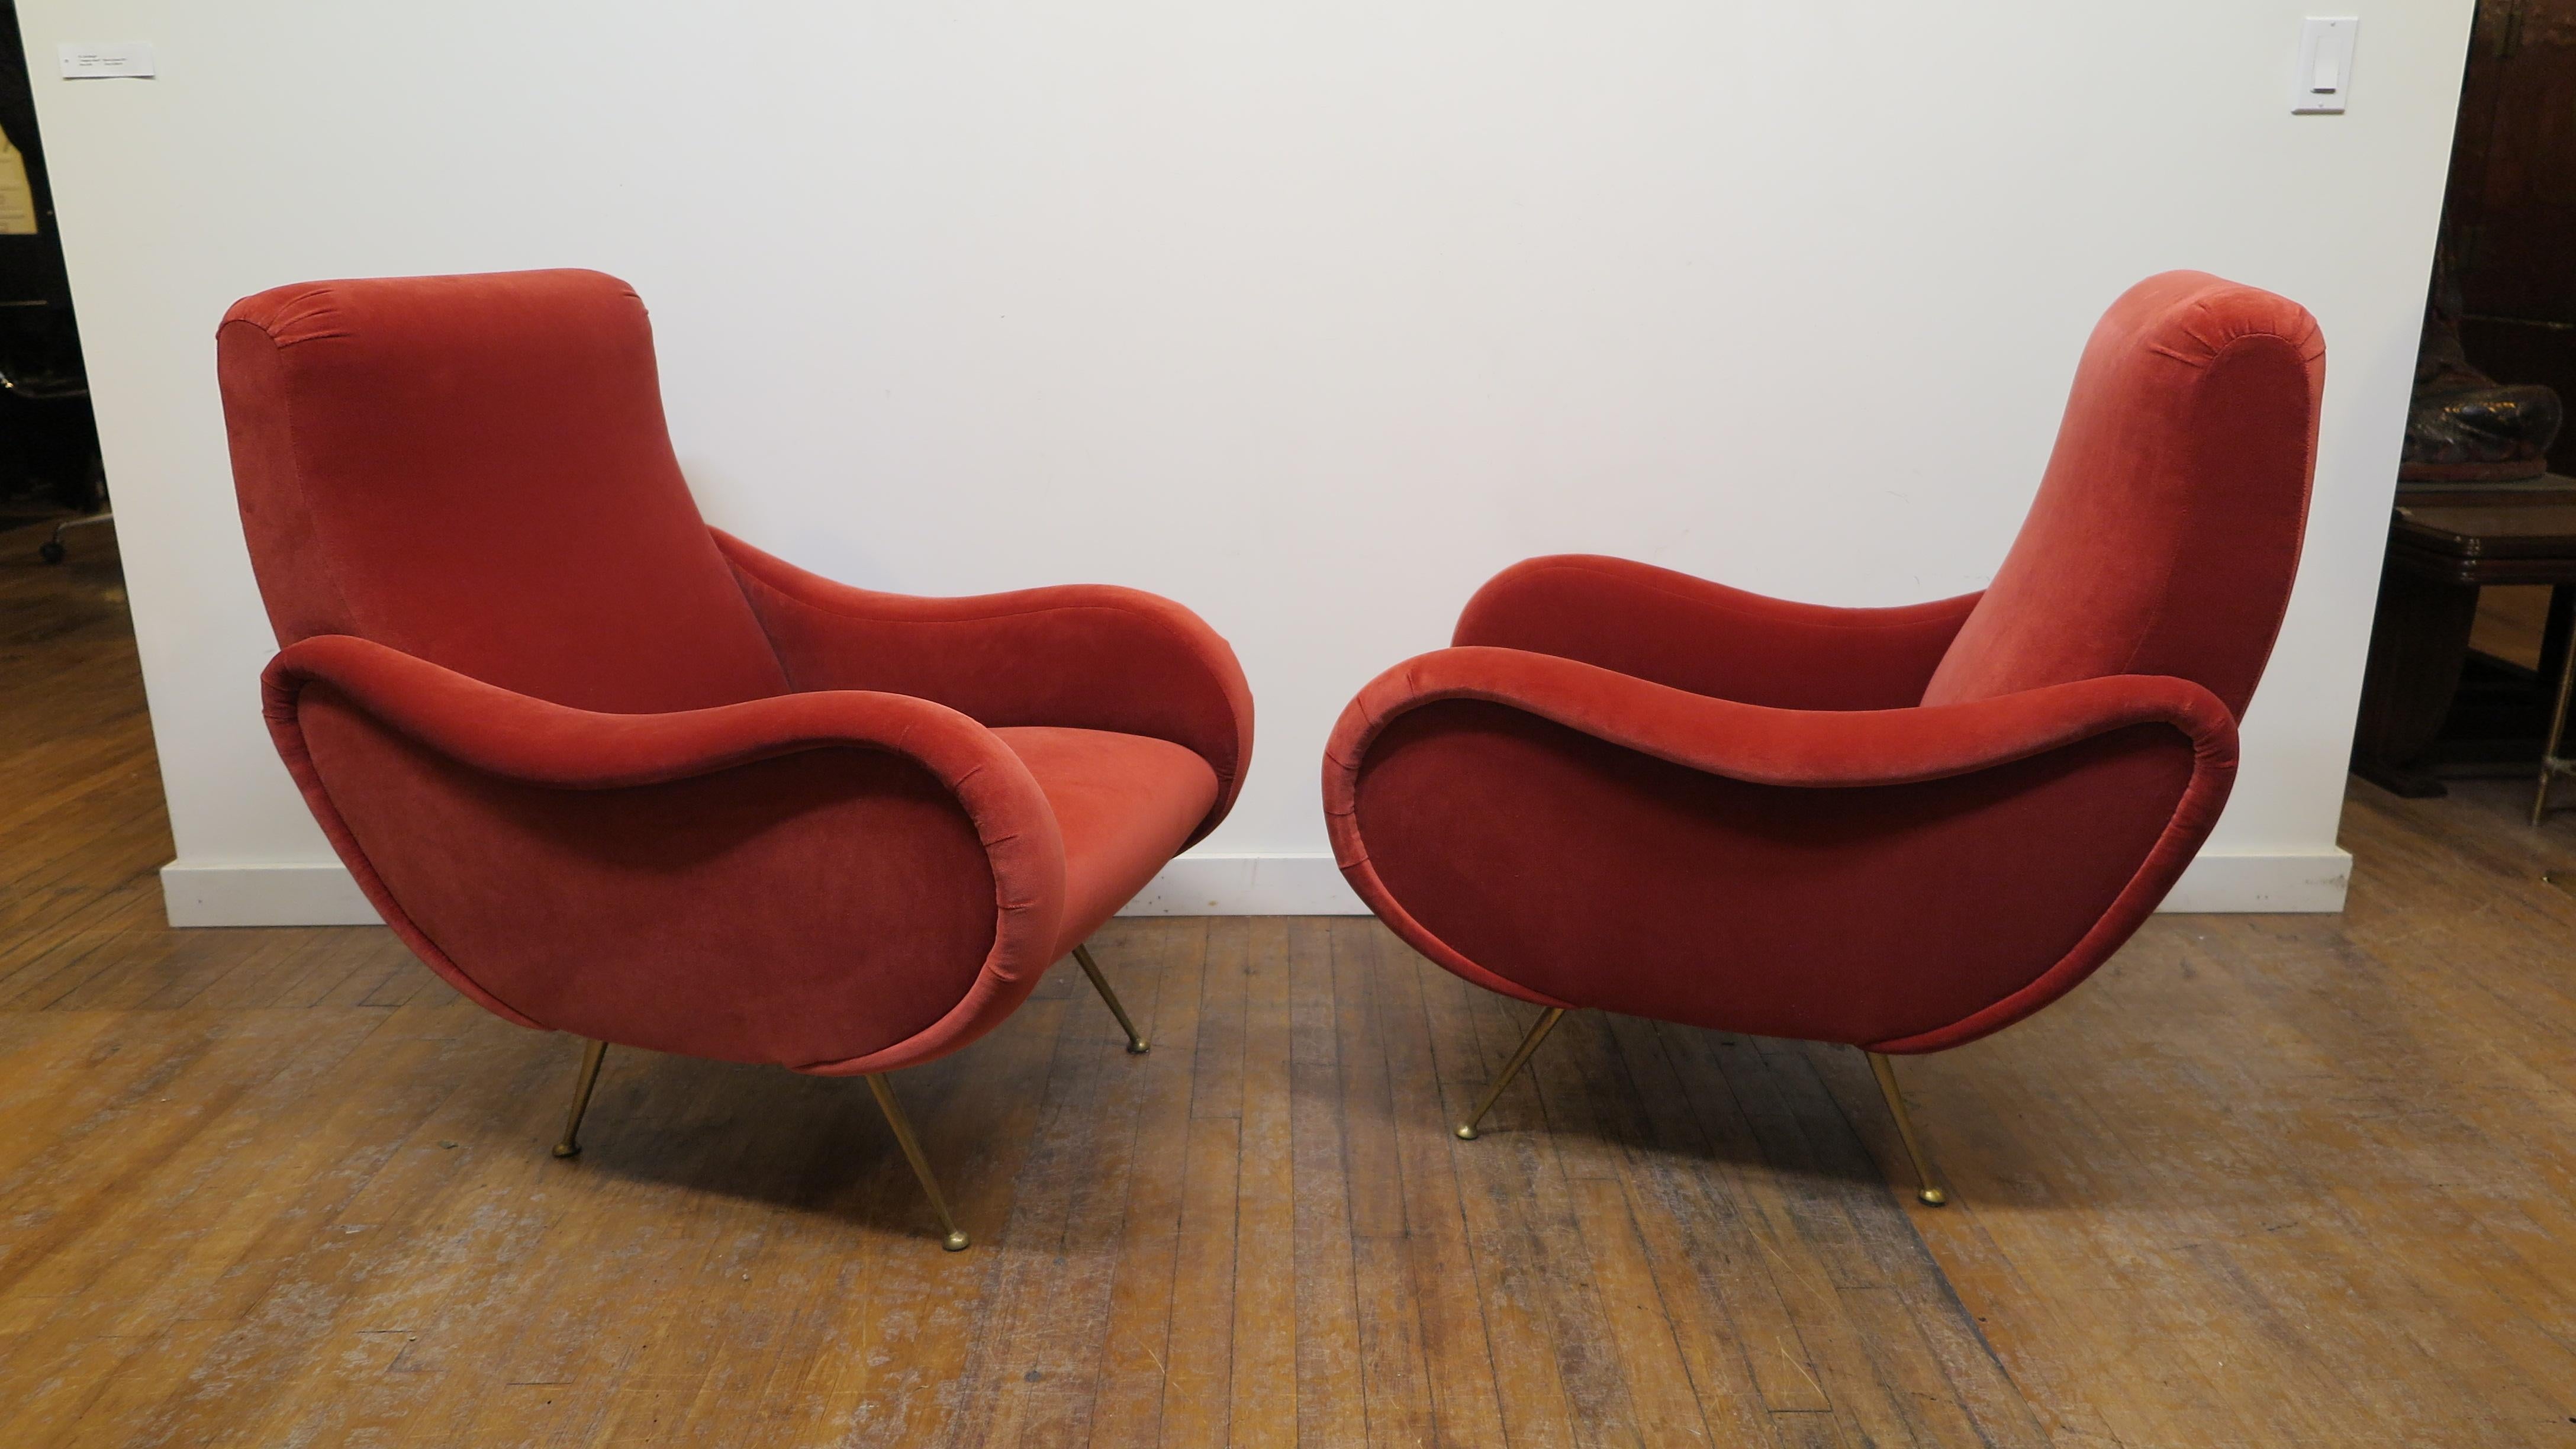 Pair of Italian sculpted lounge chairs in the style of Marco Zanuso.  Zanuso style Italian Sculpted lounge chairs with solid brass legs upholstered in Nobilis Pairs Velvet.   Contoured seat provides great support and position.  Beautifully sculpted